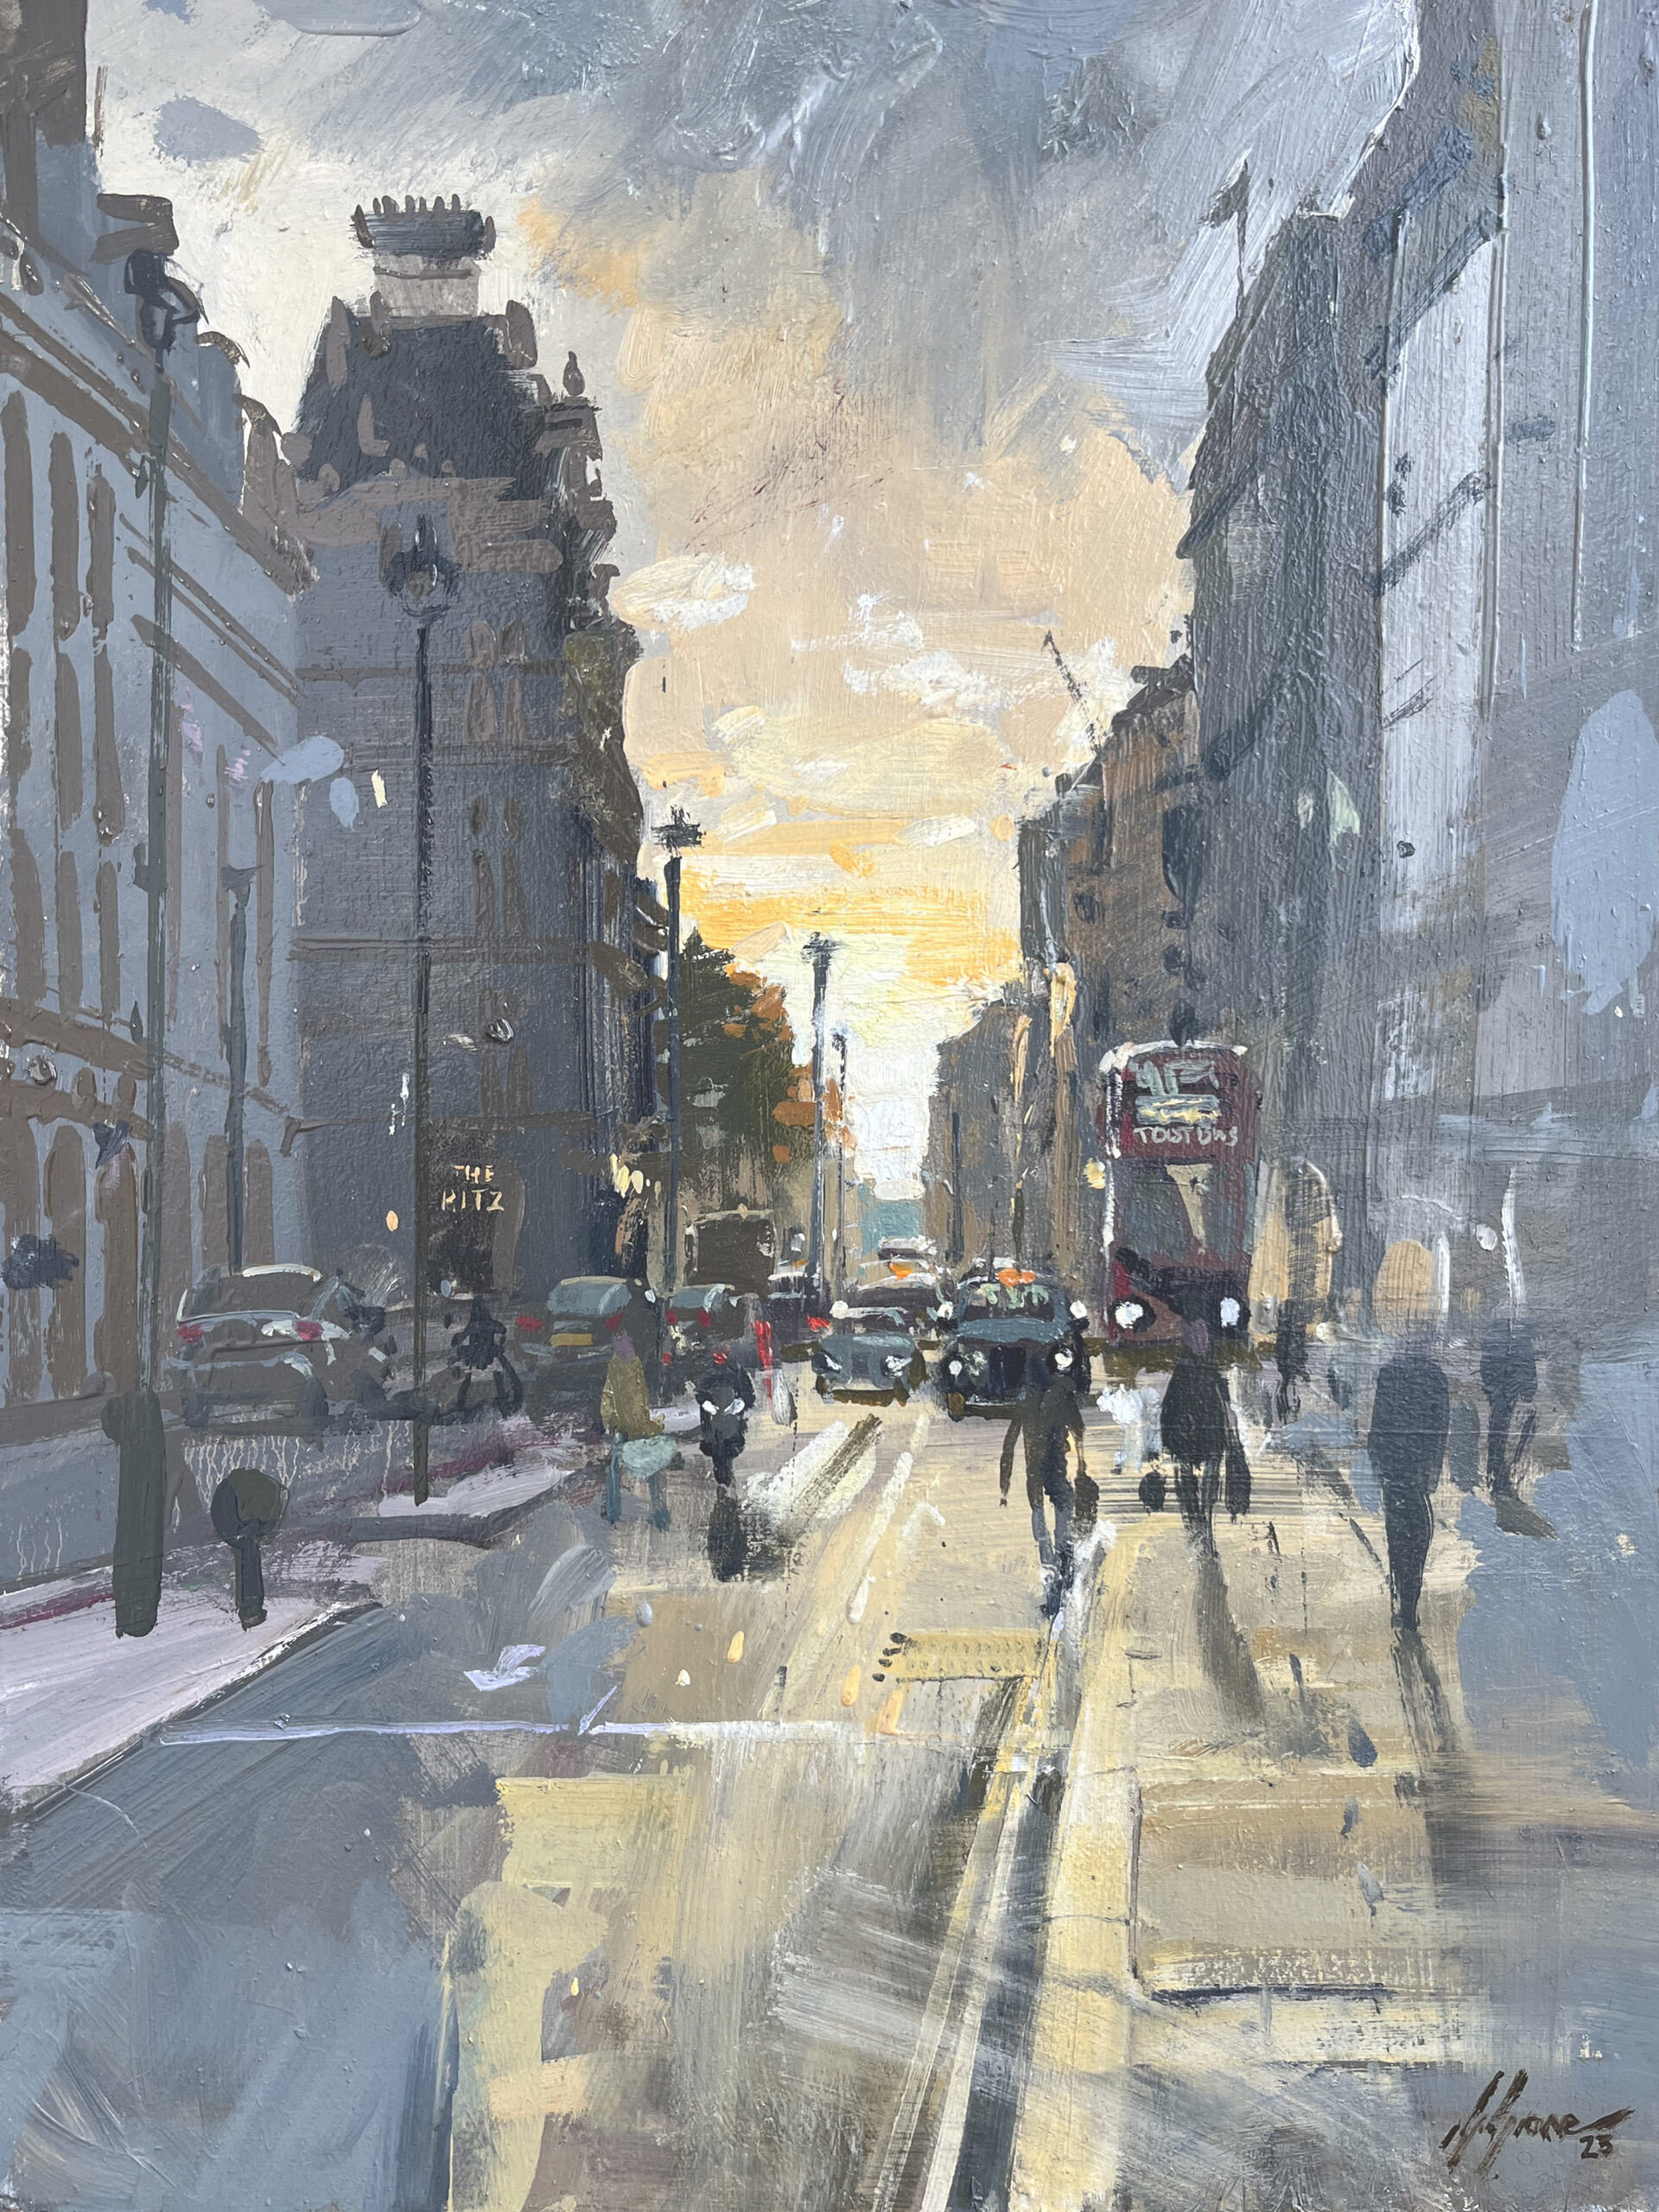 Sun going down at Piccadilly. Painting by Nick Grove.